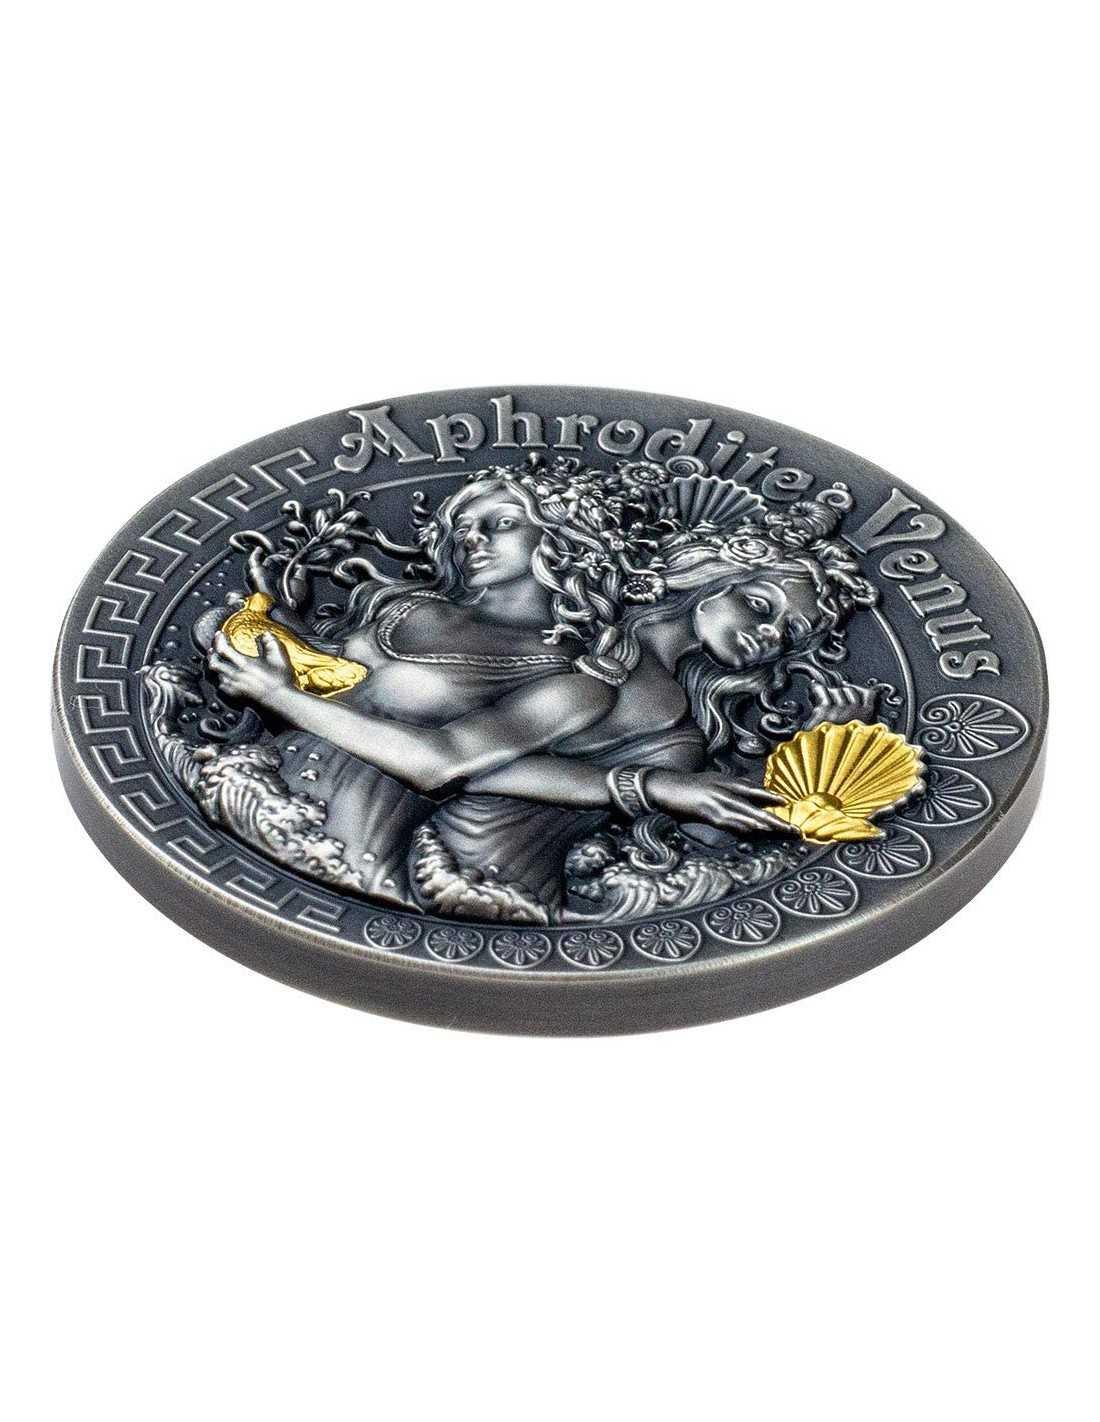 APHRODITE AND VENUS STRONG AND BEAUTIFUL GODDESSES 2 OZ Silver Coin 5$ Niue 2020 - PARTHAVA COIN